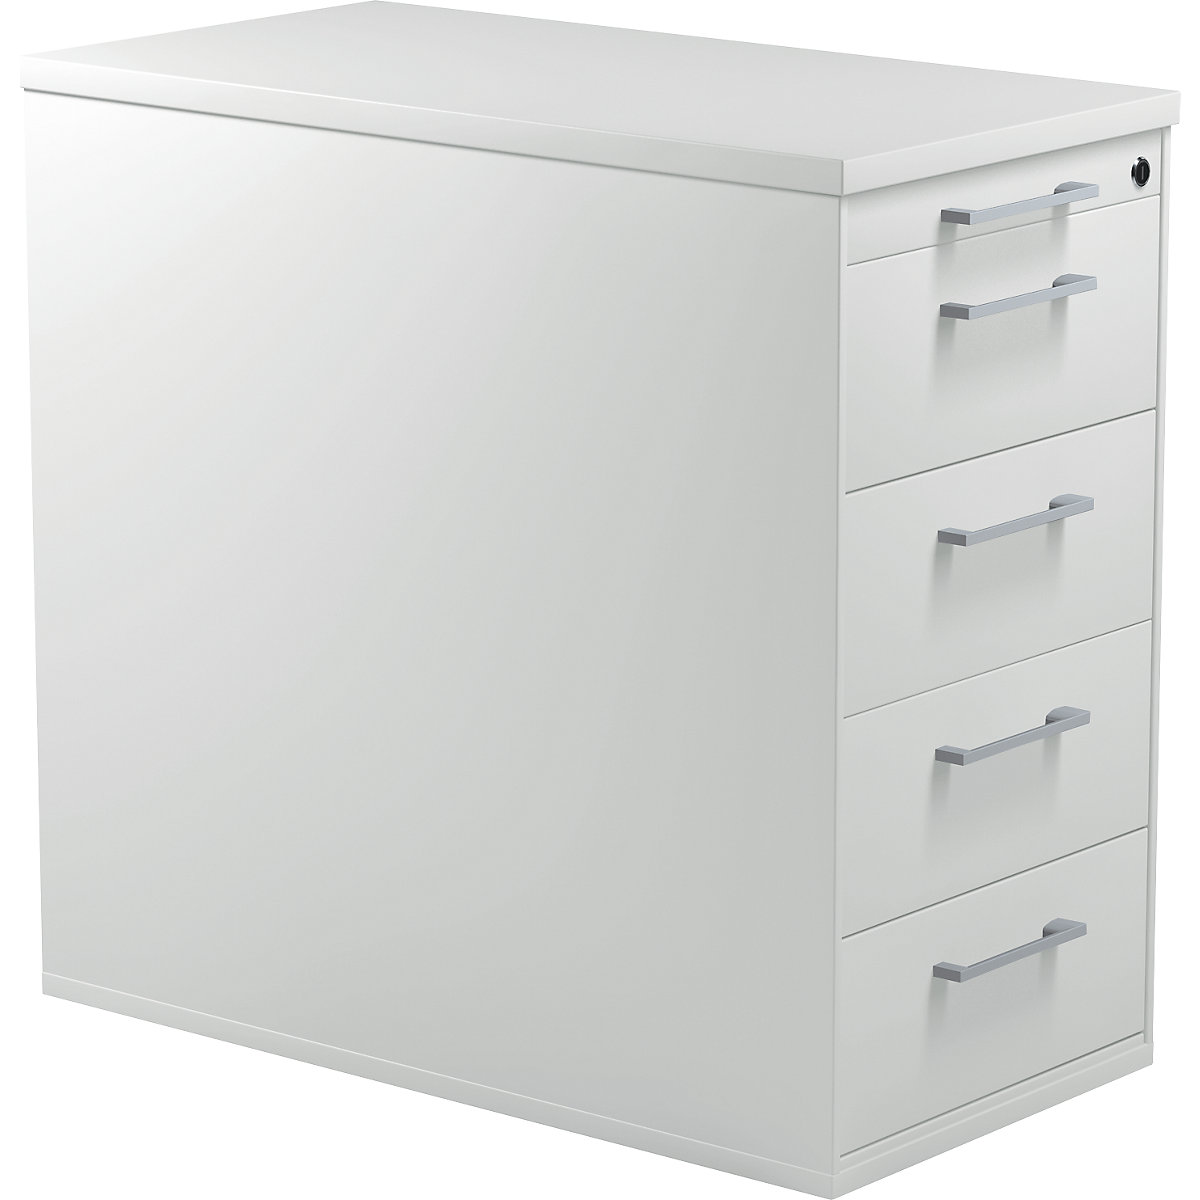 Drawer pedestal with plinth – mauser, height 720 mm, plastic top, 4 drawers, light grey / light grey / light grey-2